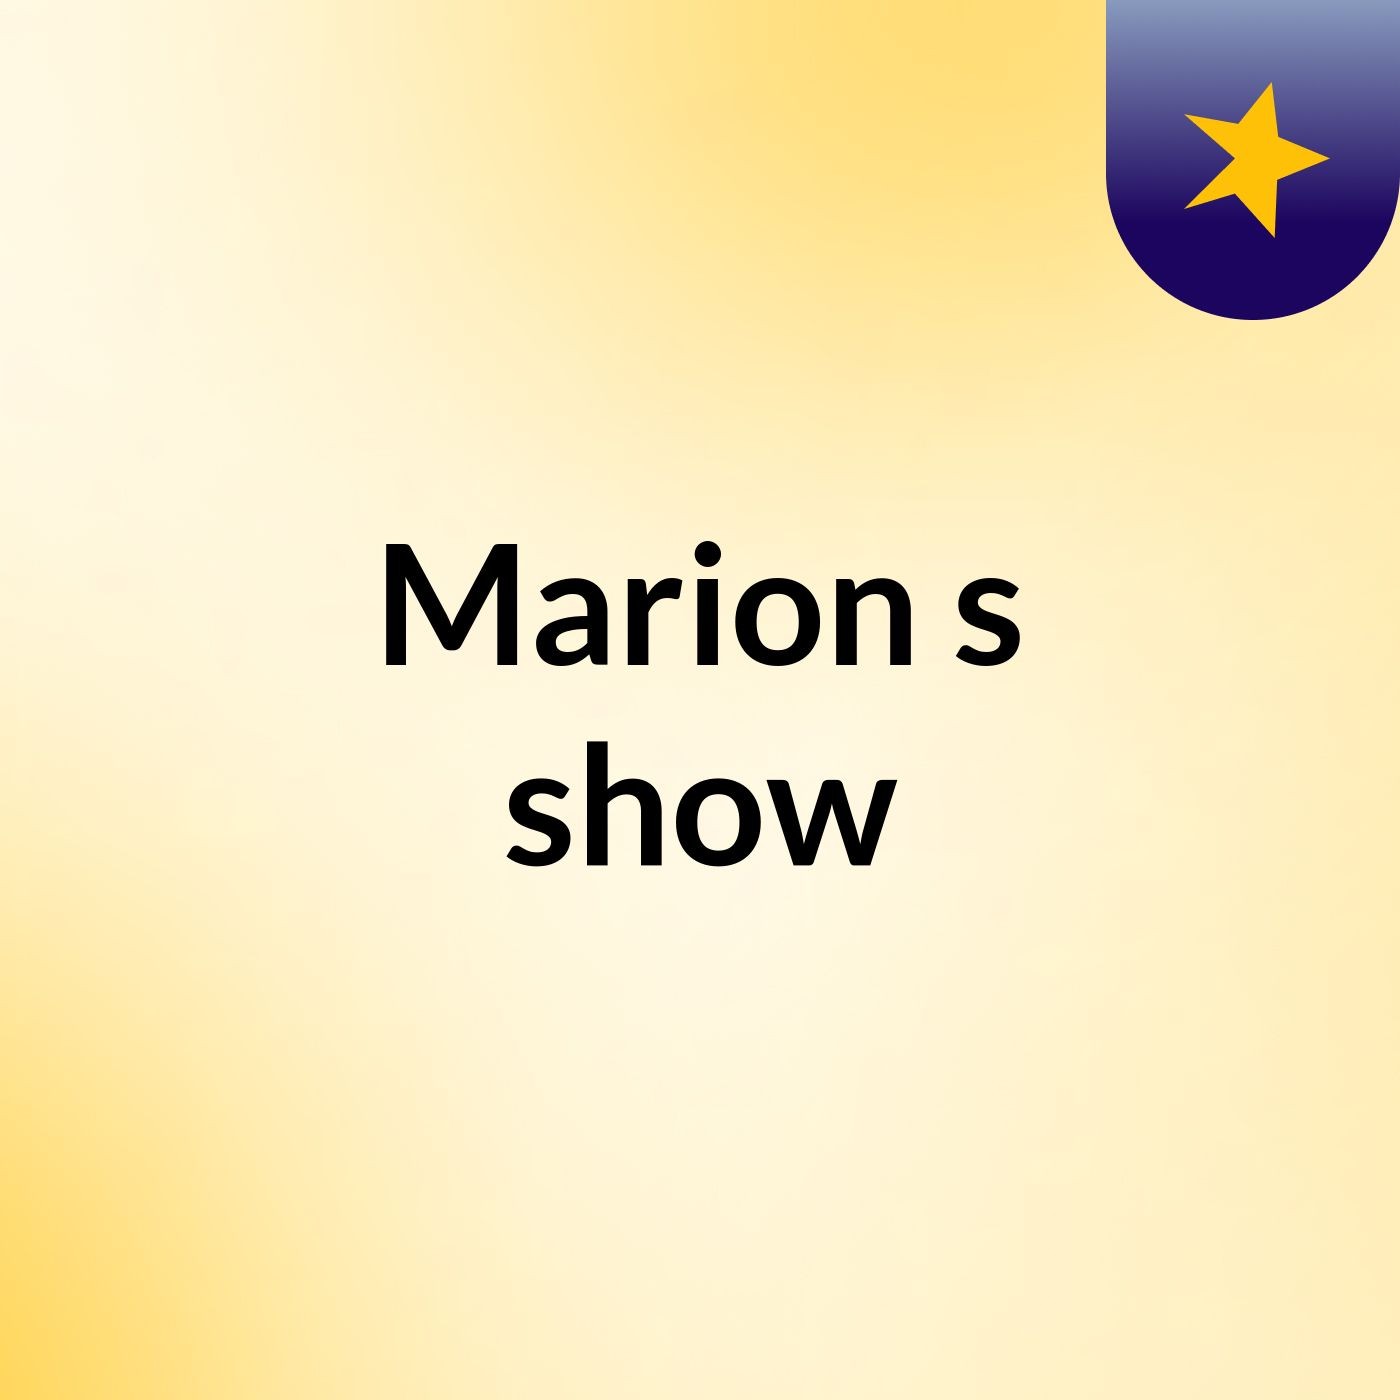 Marion's show